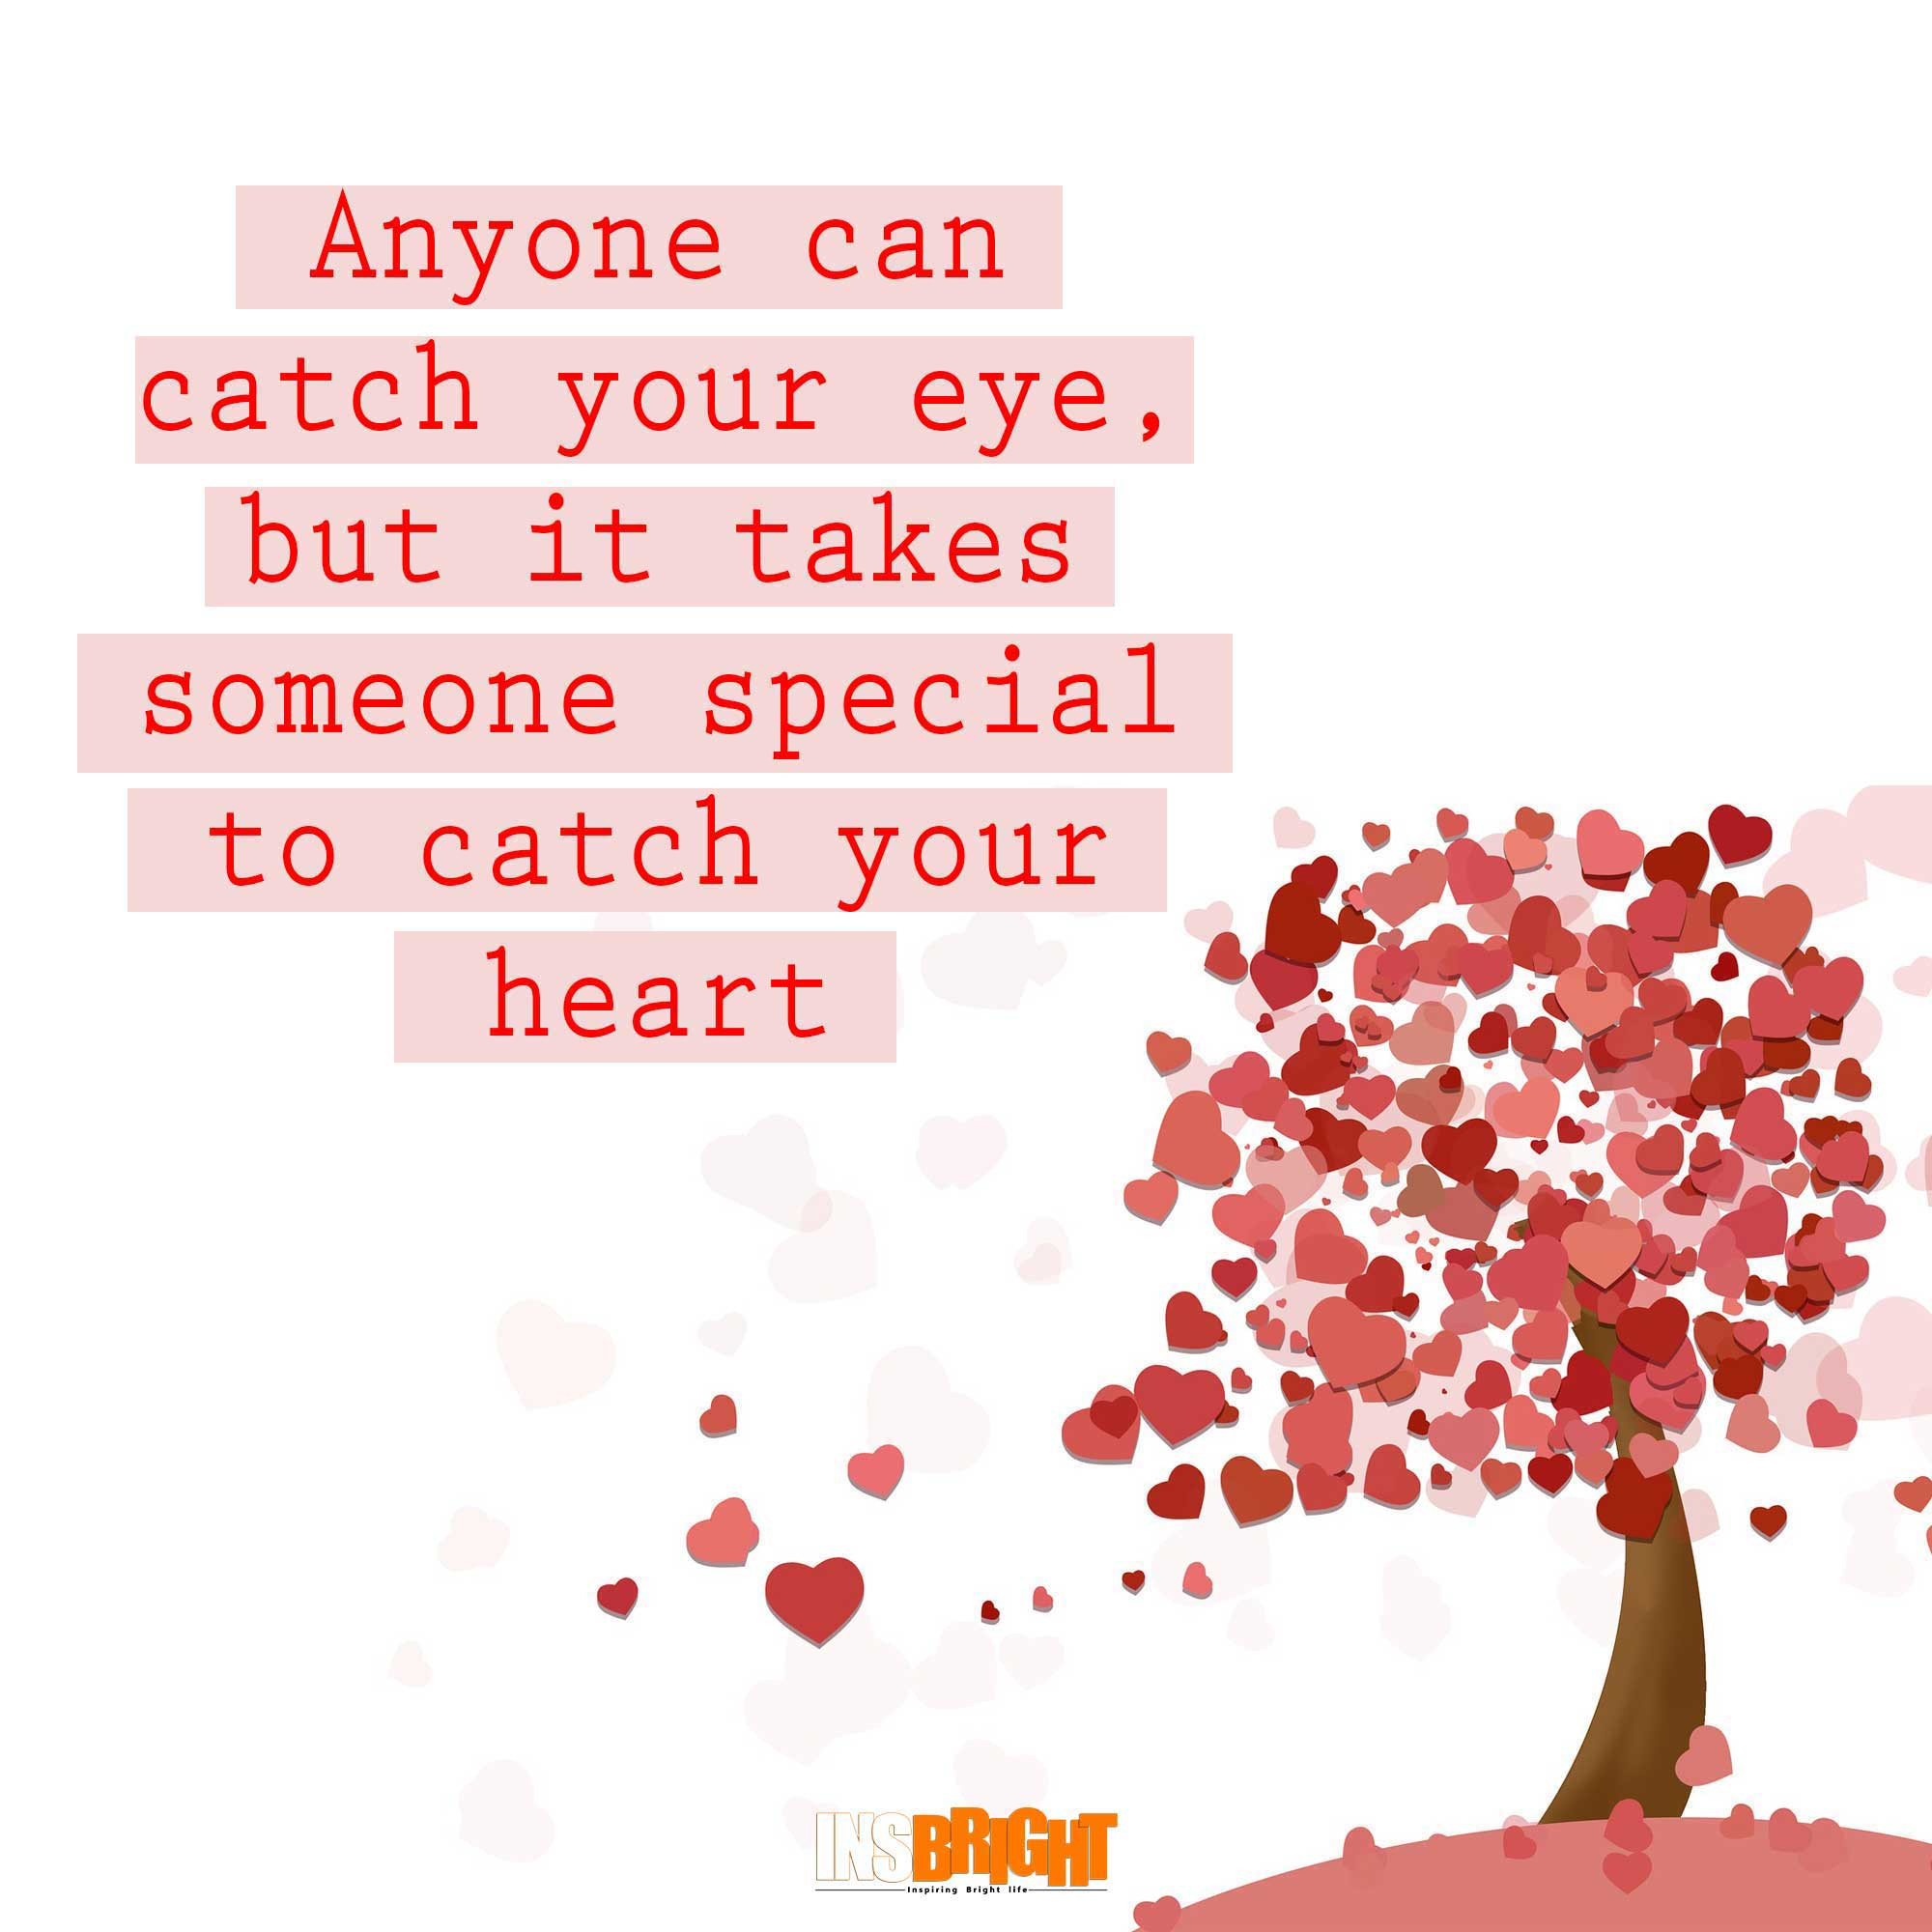 Valentines Day Quotes For Her
 Cute Happy Valentines Day Quotes With For Him or